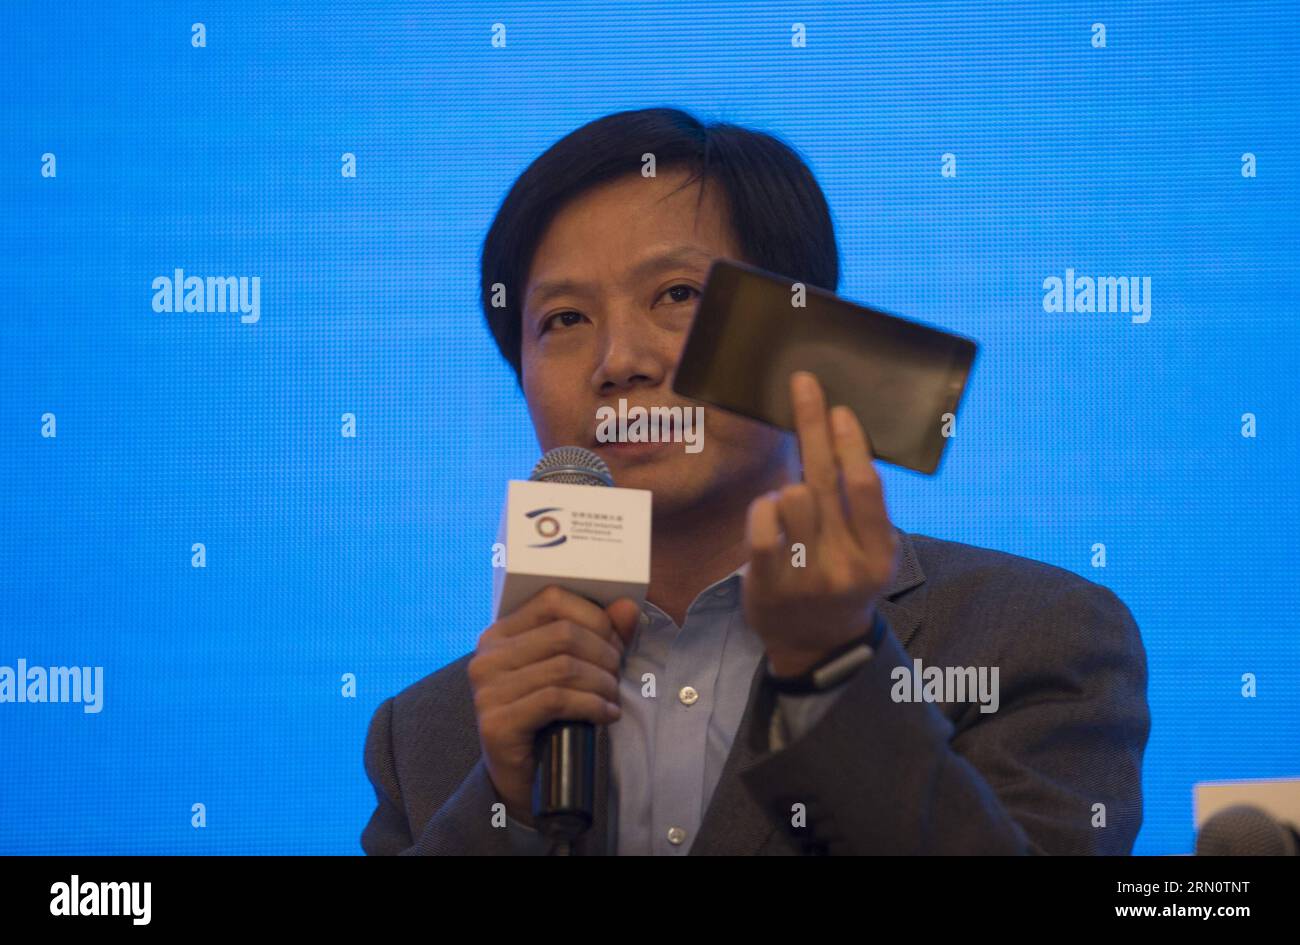 (141119) -- WUZHEN, Nov. 19, 2014 -- Lei Jun, CEO of Xiaomi, a technology firm, delivers a speech at a forum on creating an online global village during the 2014 World Internet Conference in Wuzhen, east China s Zhejiang Province, Nov. 19, 2014. Representatives from nearly 100 countries and regions took part in the three-day 2014 World Internet Conference that kicked off Wednesday in Wuzhen. ) (lmm) CHINA-ZHEJIANG-WUZHEN-WORLD INTERNET CONFERENCE (CN) JuxHuanzong PUBLICATIONxNOTxINxCHN   Wuzhen Nov 19 2014 Lei jun CEO of Xiaomi a Technology Firm delivers a Speech AT a Forum ON creating to Onli Stock Photo